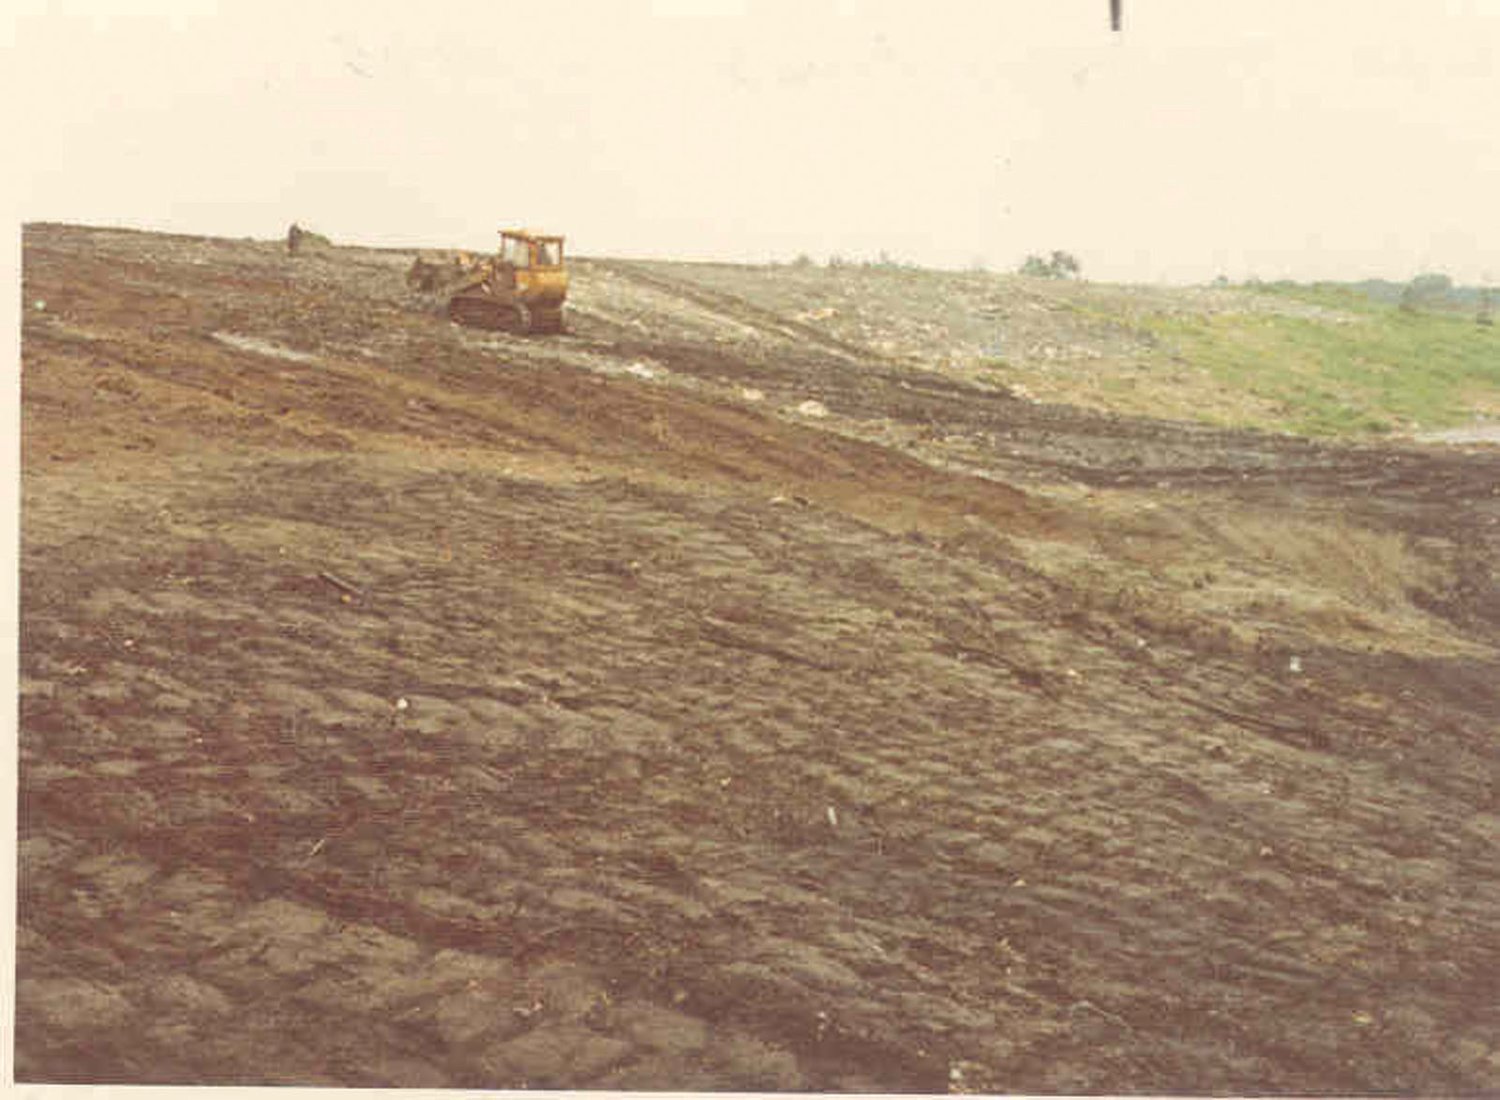 IN ACTION:  This photograph taken by Larry Coletta on Aug. 7, 1975, shows the extent of the landfill when the buffer area to the neighborhood had been virtually removed.